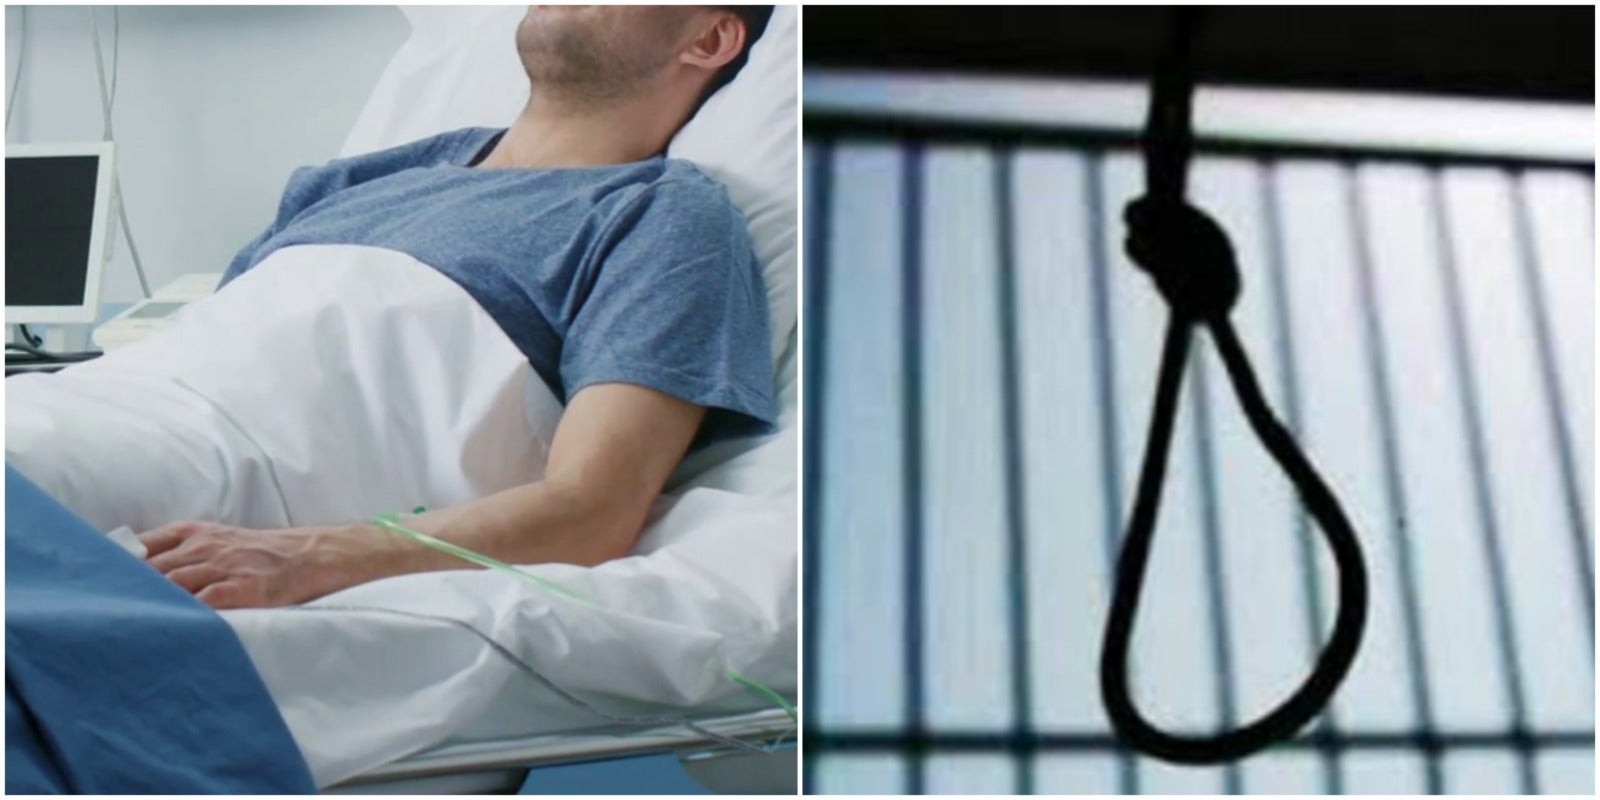 32yo M'sian Man Tired of Battling Colon Cancer Commits Suicide in Johor Bahru - WORLD OF BUZZ